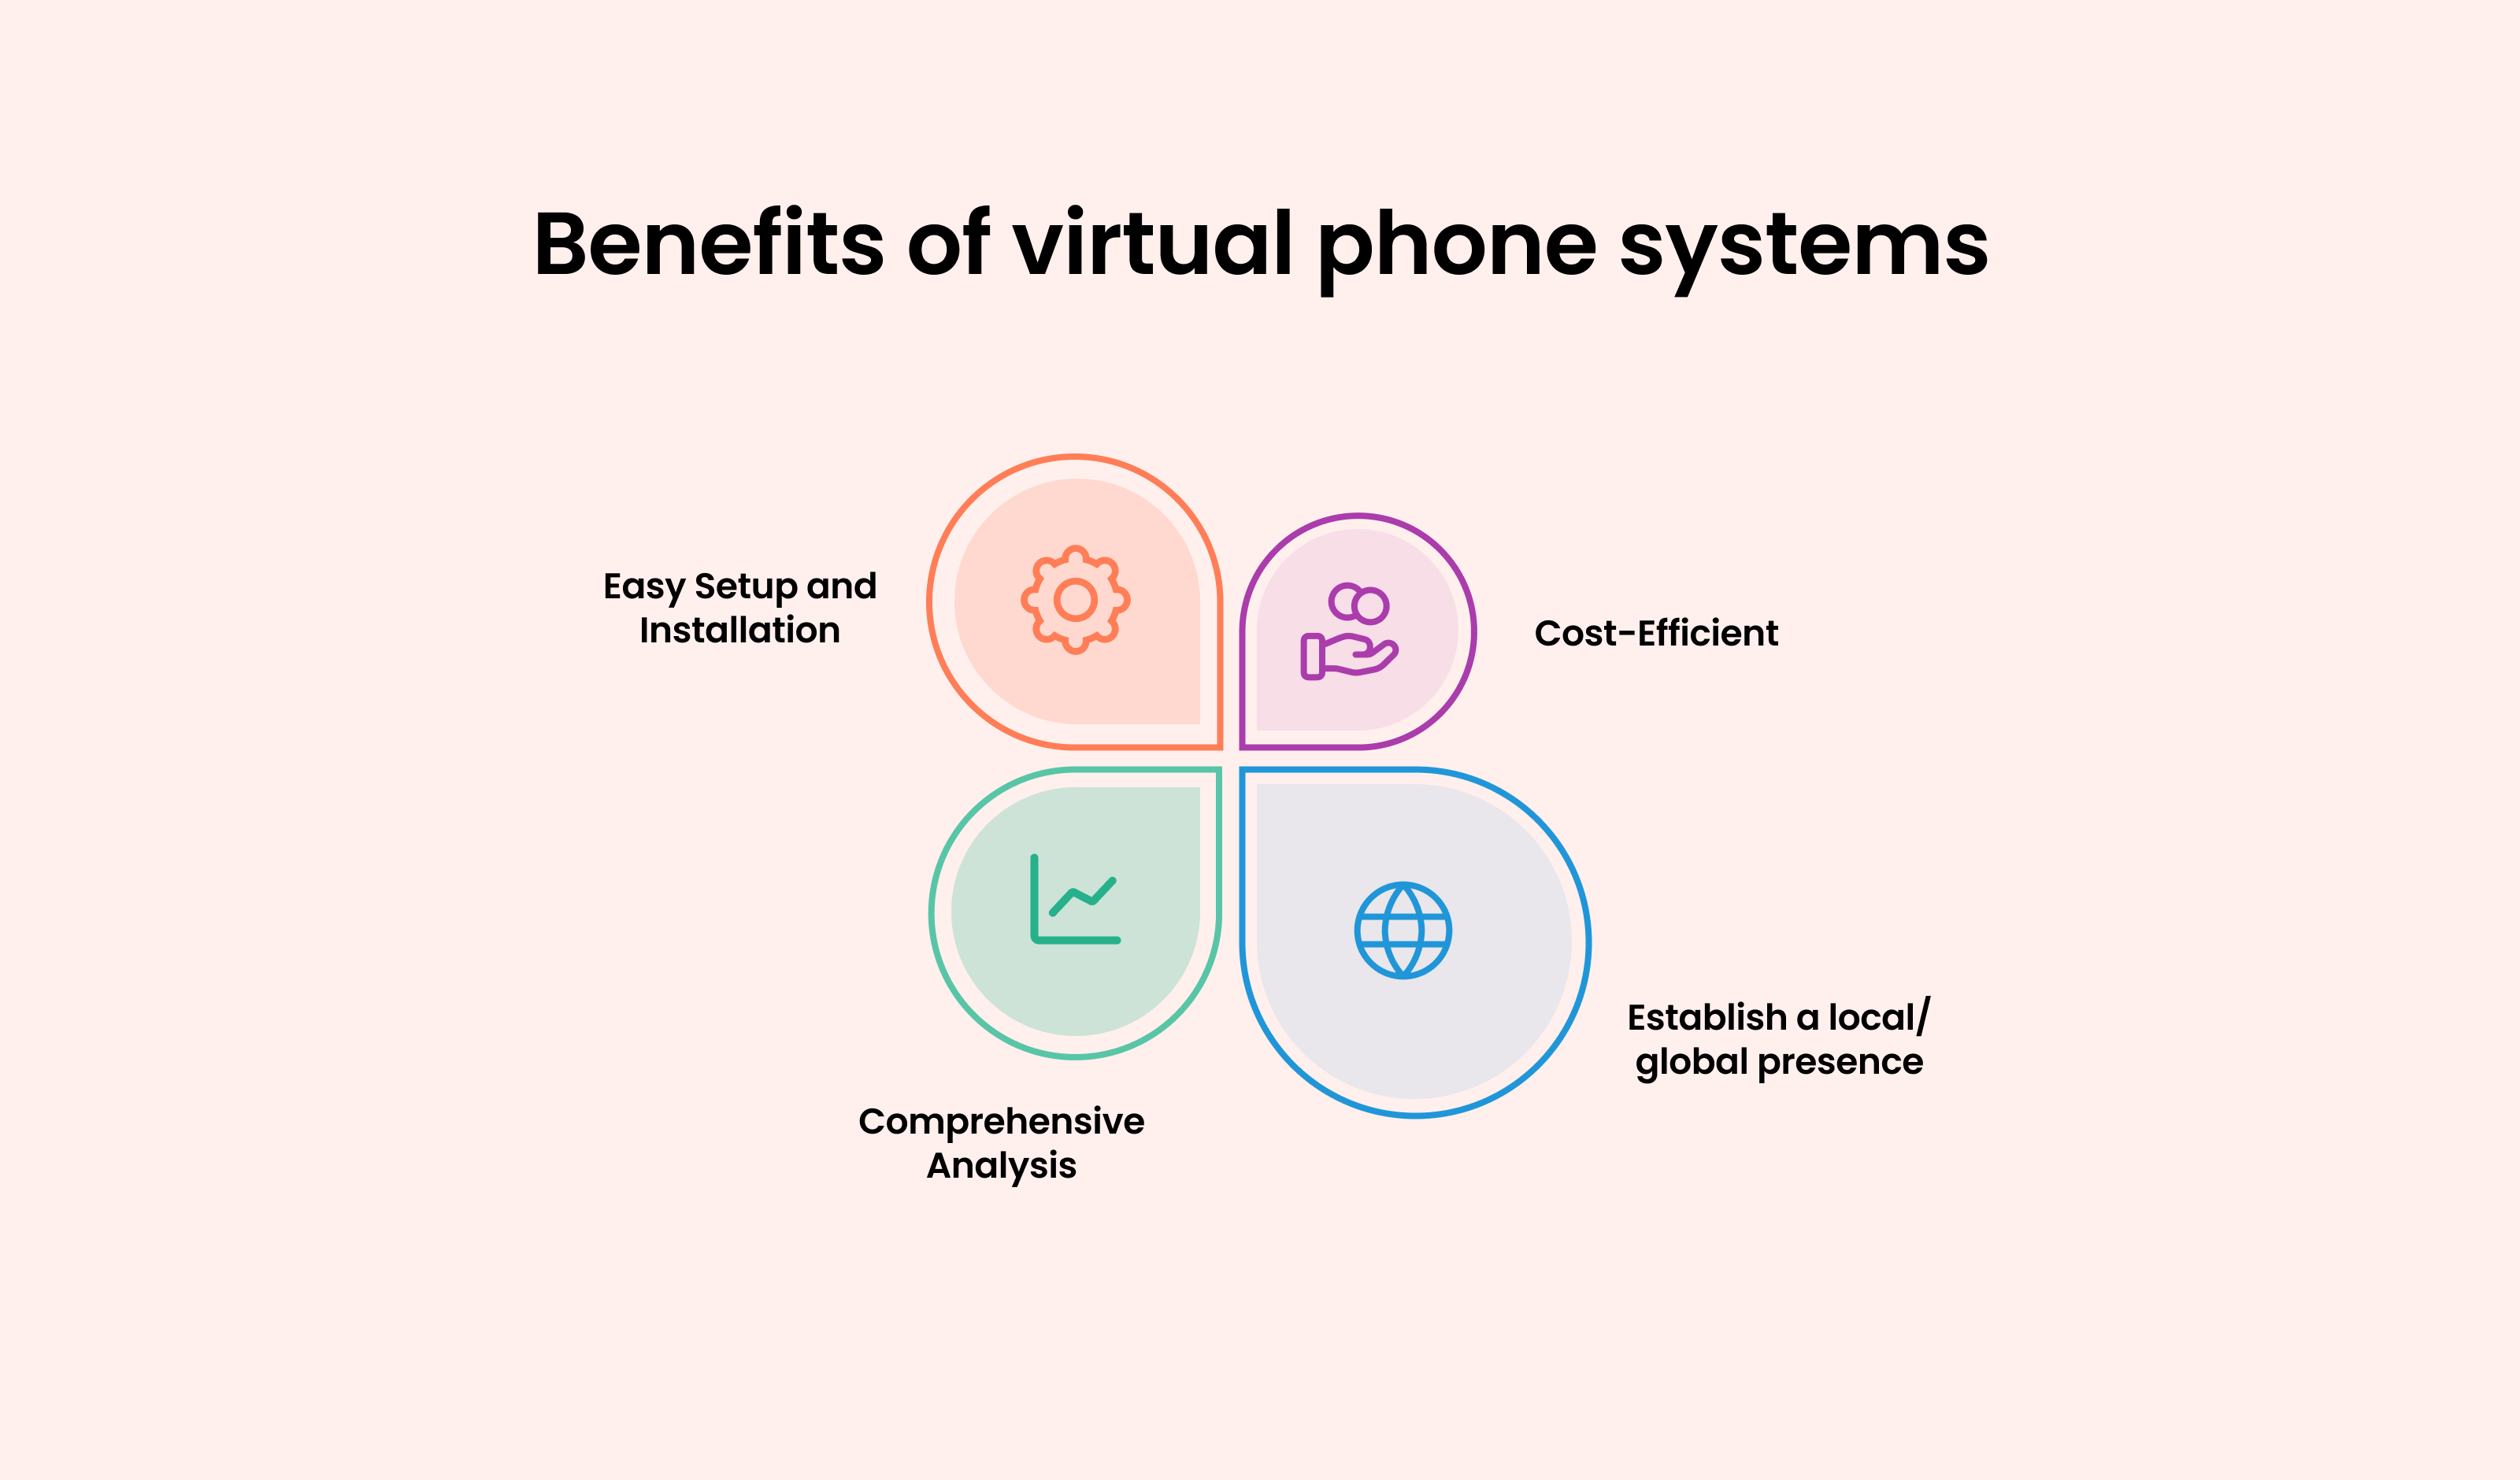 Benefits of Virtual Phone Systems